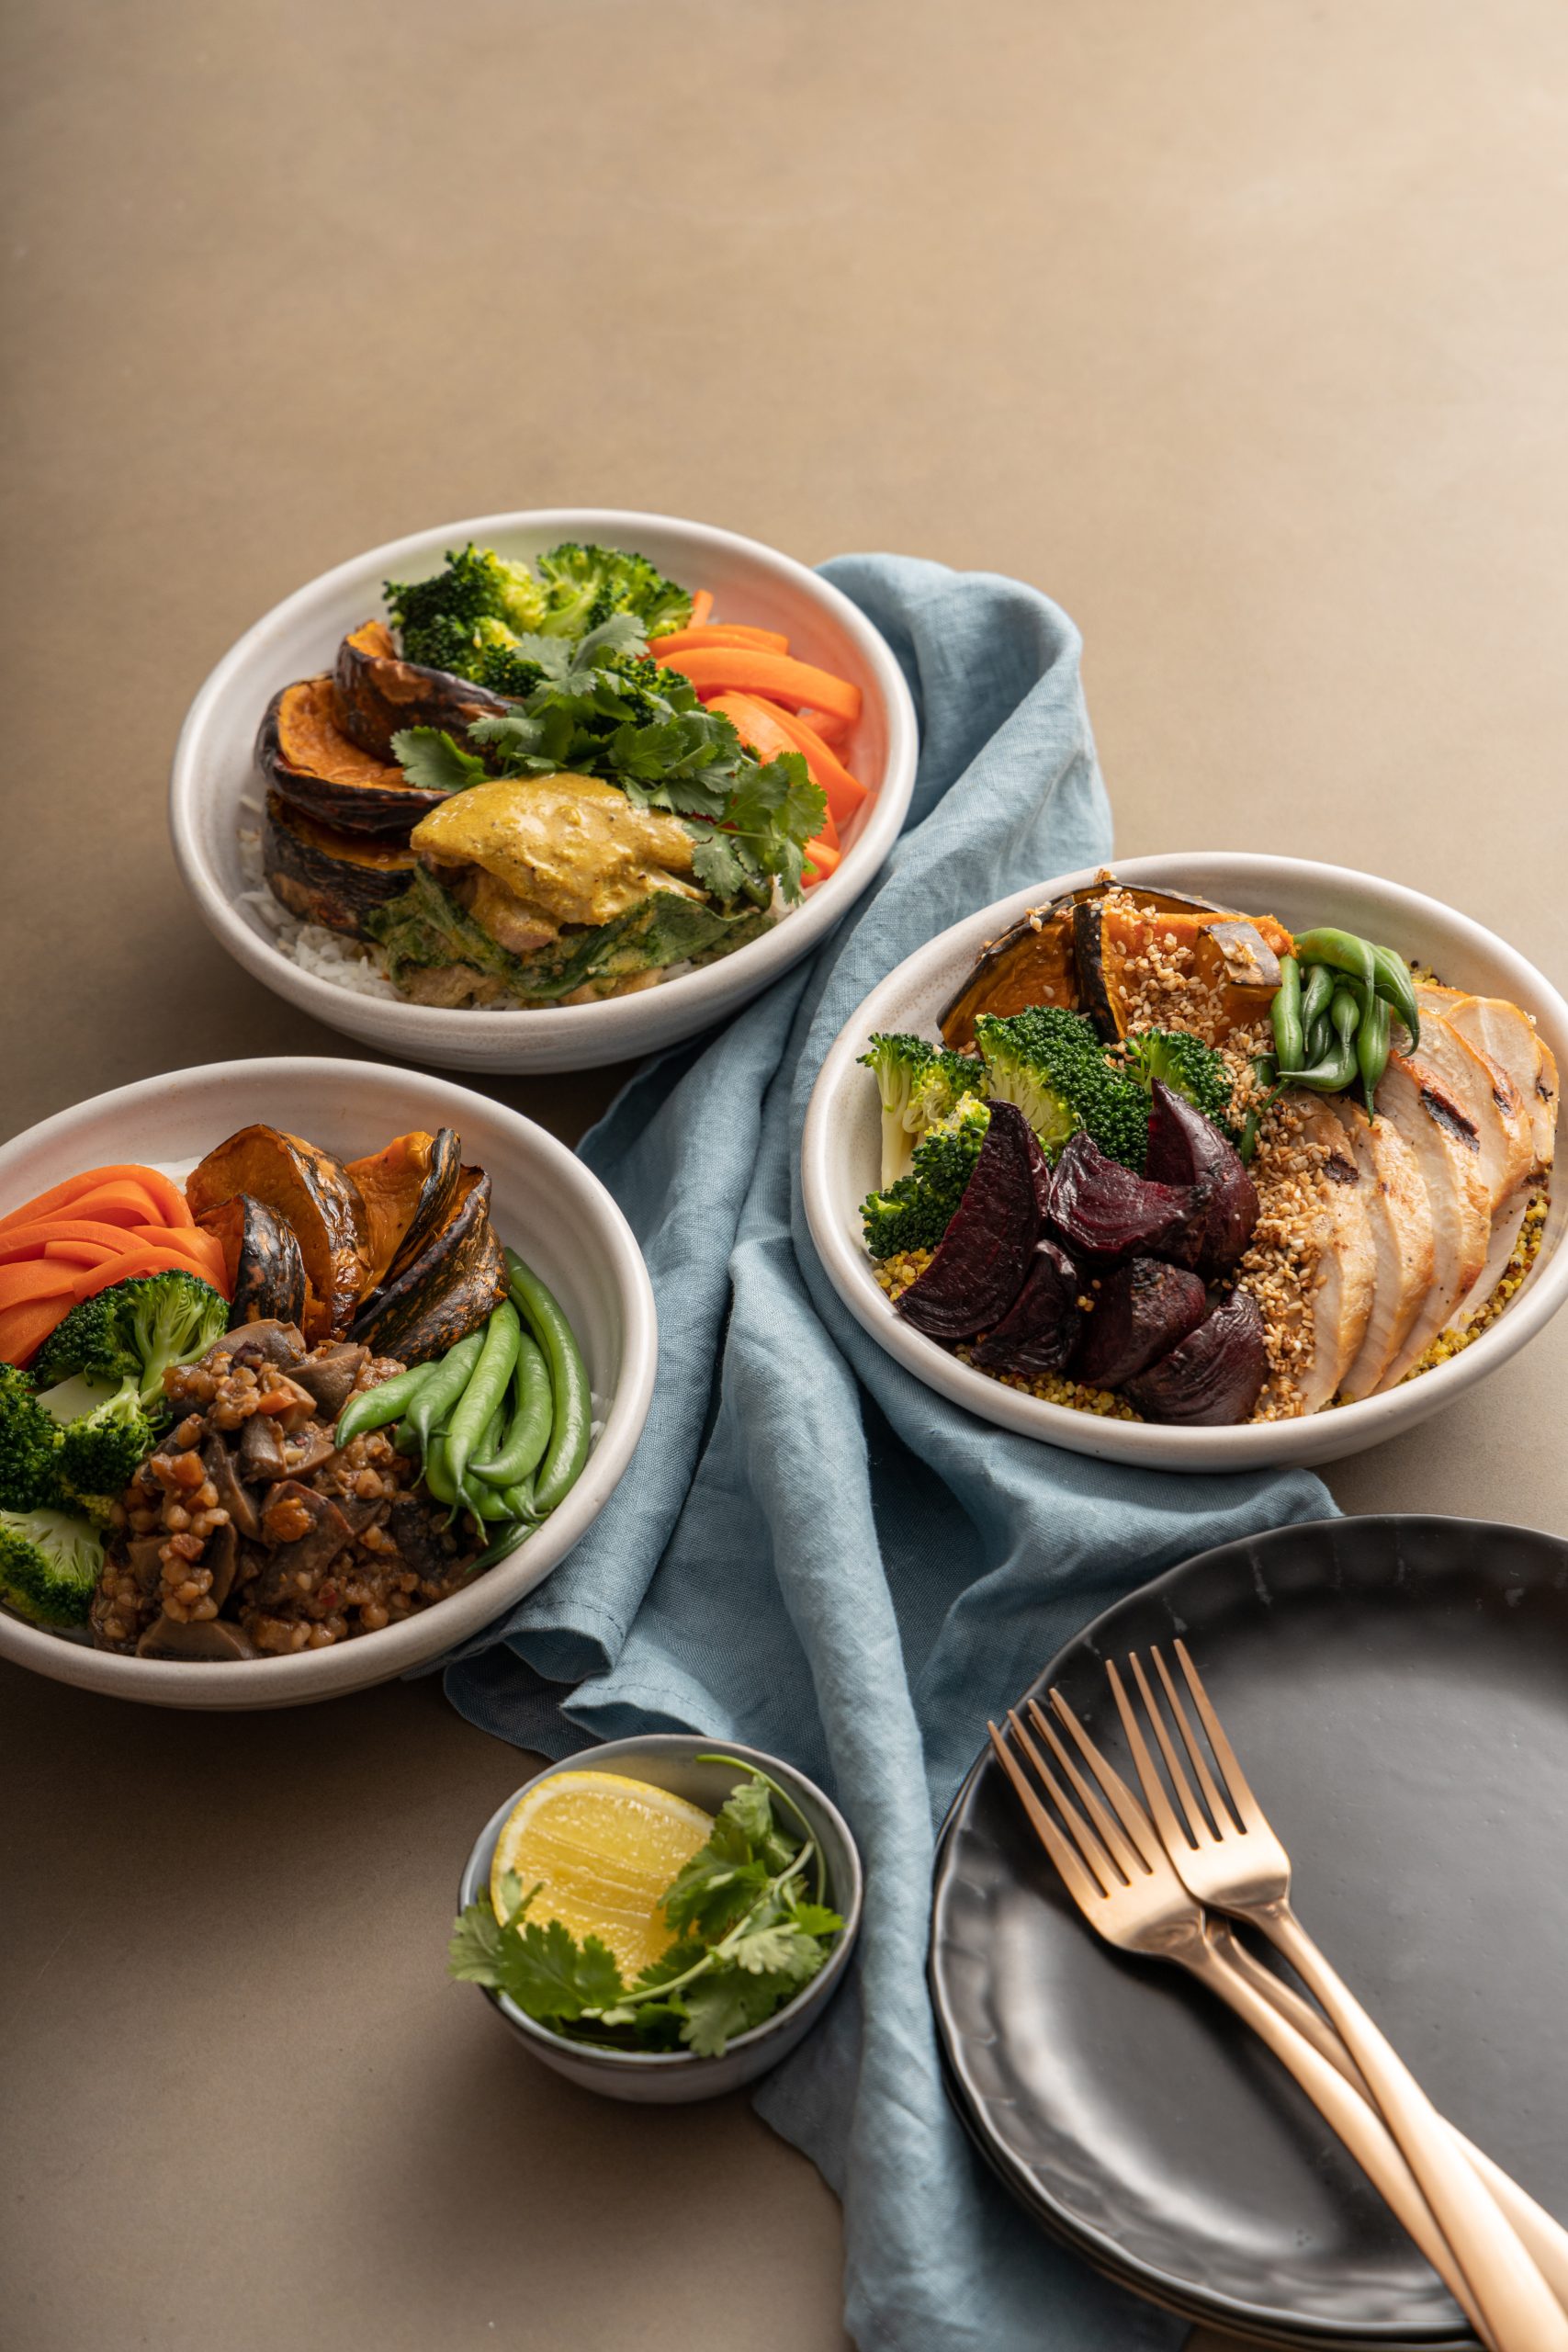 WIN a Month’s Worth of Meals From Bowlsome Each For You and a Friend!